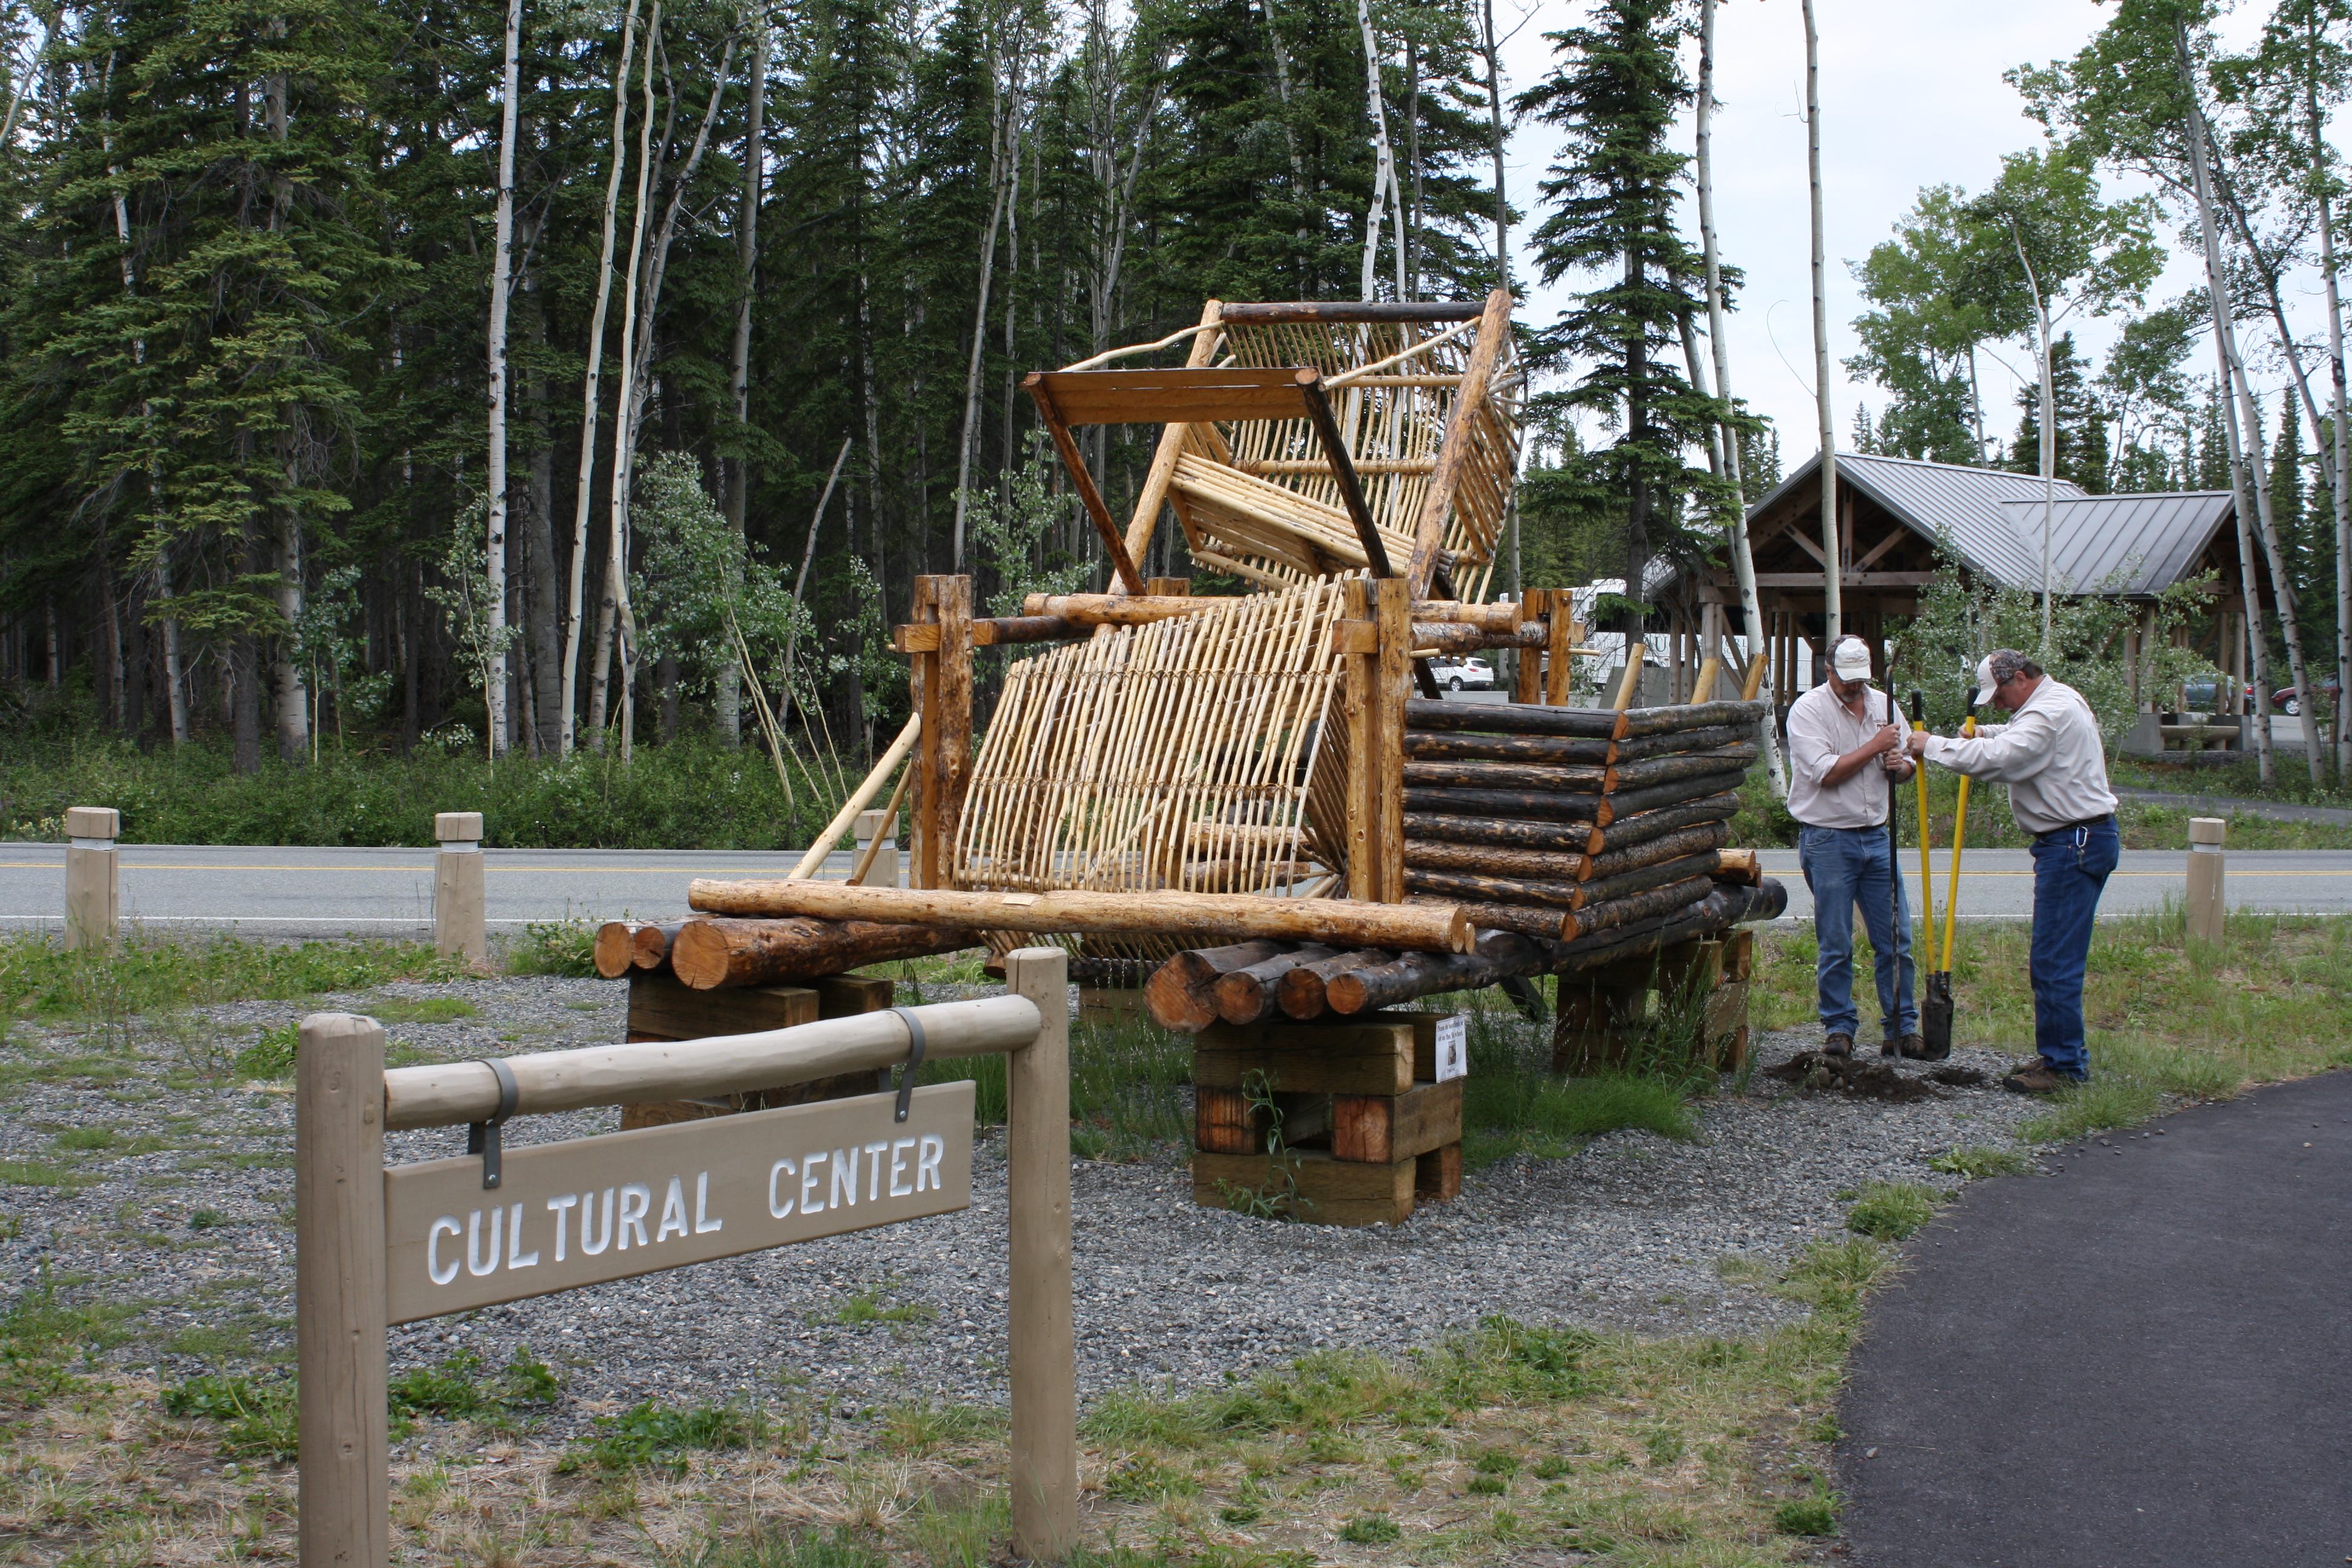 Gregory Sports and Bob Chase of the Copper River Princess Wilderness Lodge's maintenance team work on digging a hole for the new sign in front of the fish wheel. 